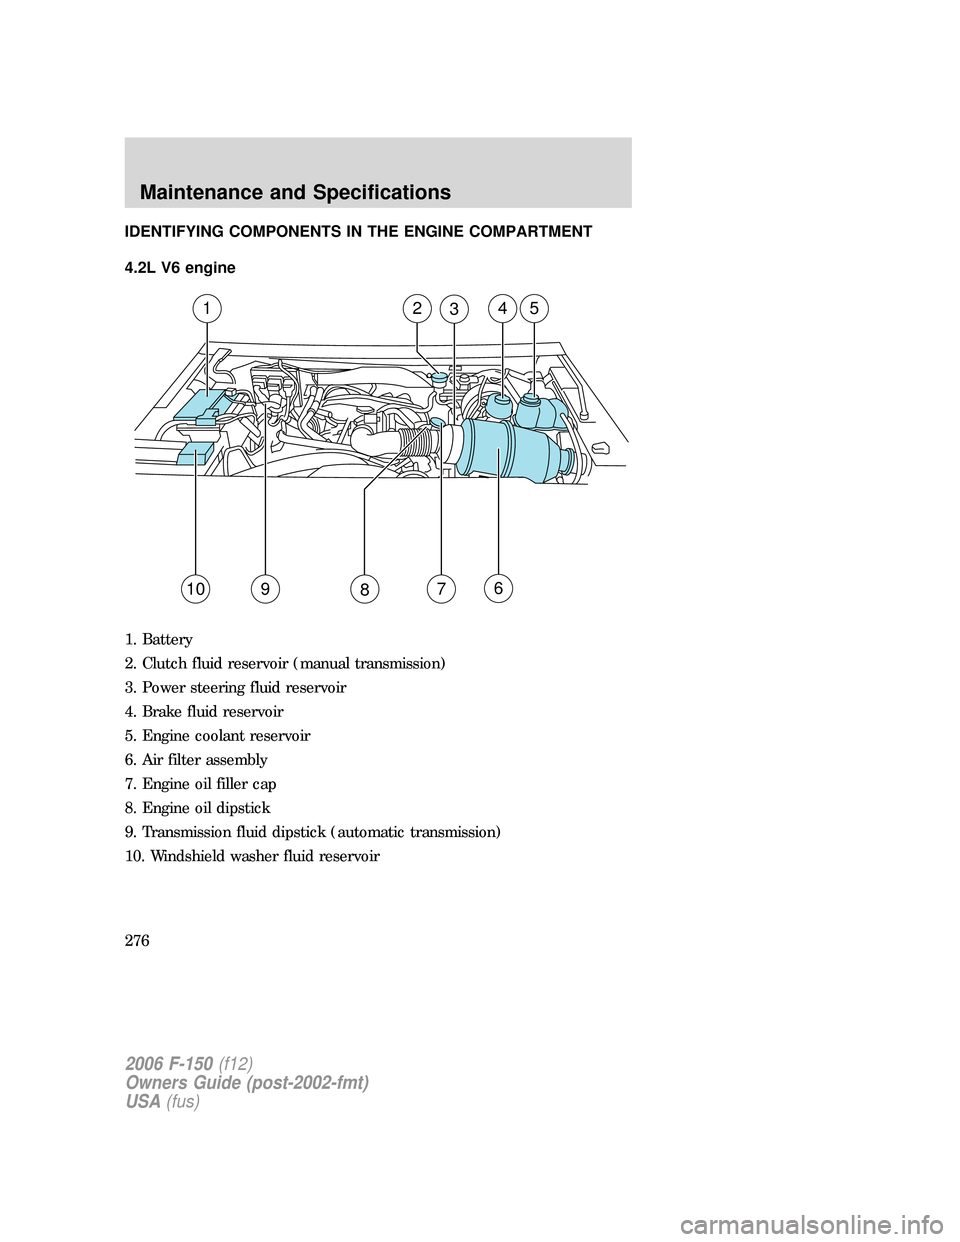 FORD F150 2006 11.G Owners Manual IDENTIFYING COMPONENTS IN THE ENGINE COMPARTMENT
4.2L V6 engine
1. Battery
2. Clutch fluid reservoir (manual transmission)
3. Power steering fluid reservoir
4. Brake fluid reservoir
5. Engine coolant 